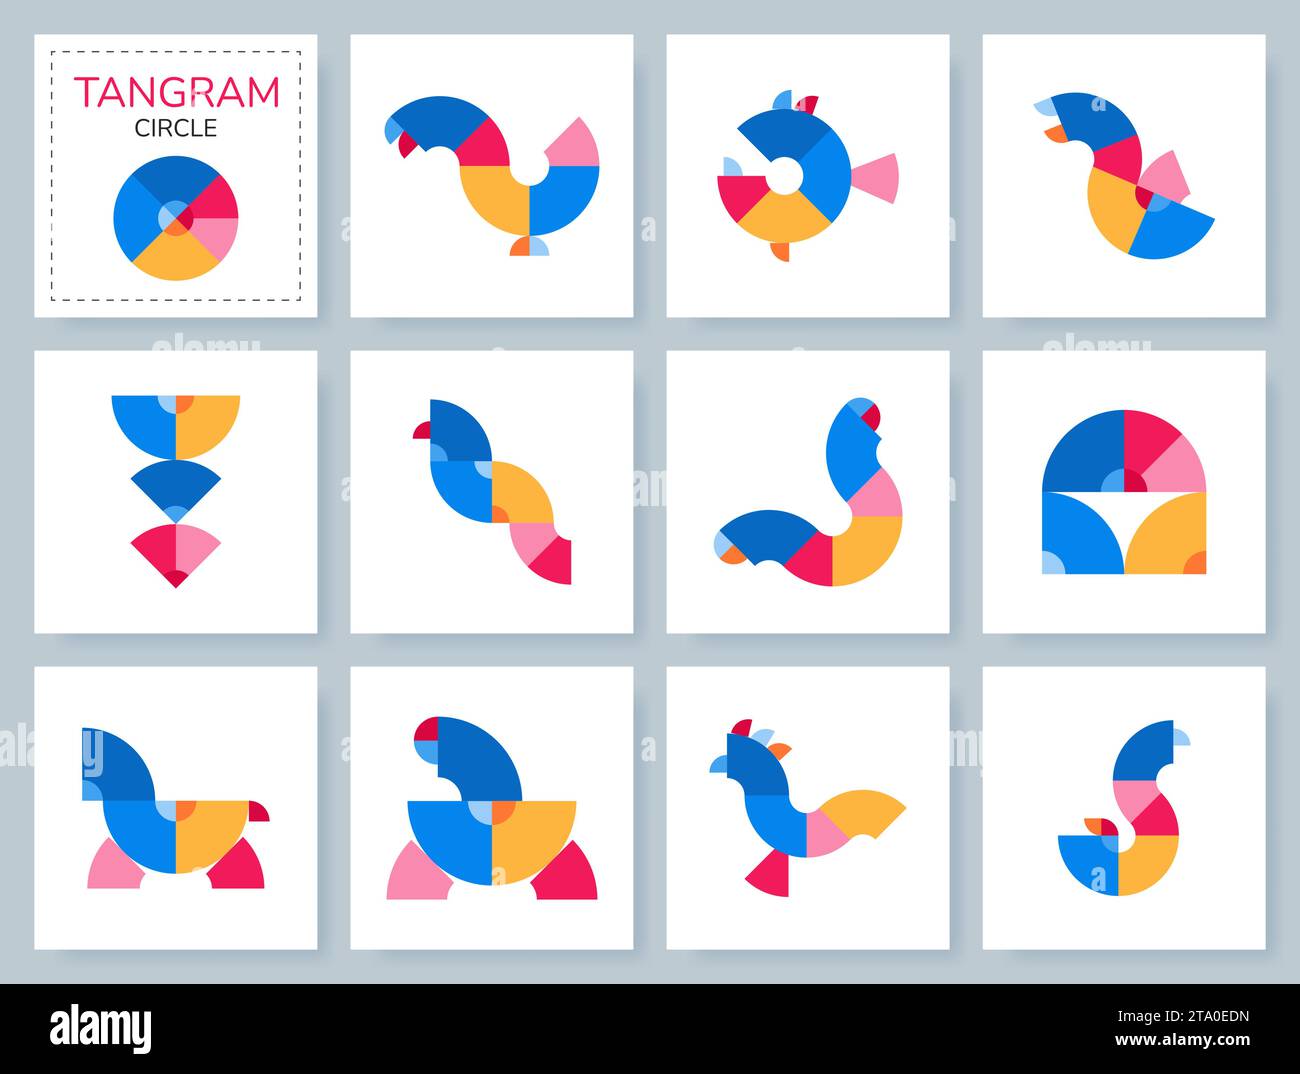 Tangram puzzle game. Vector set with various objects. Stock Vector